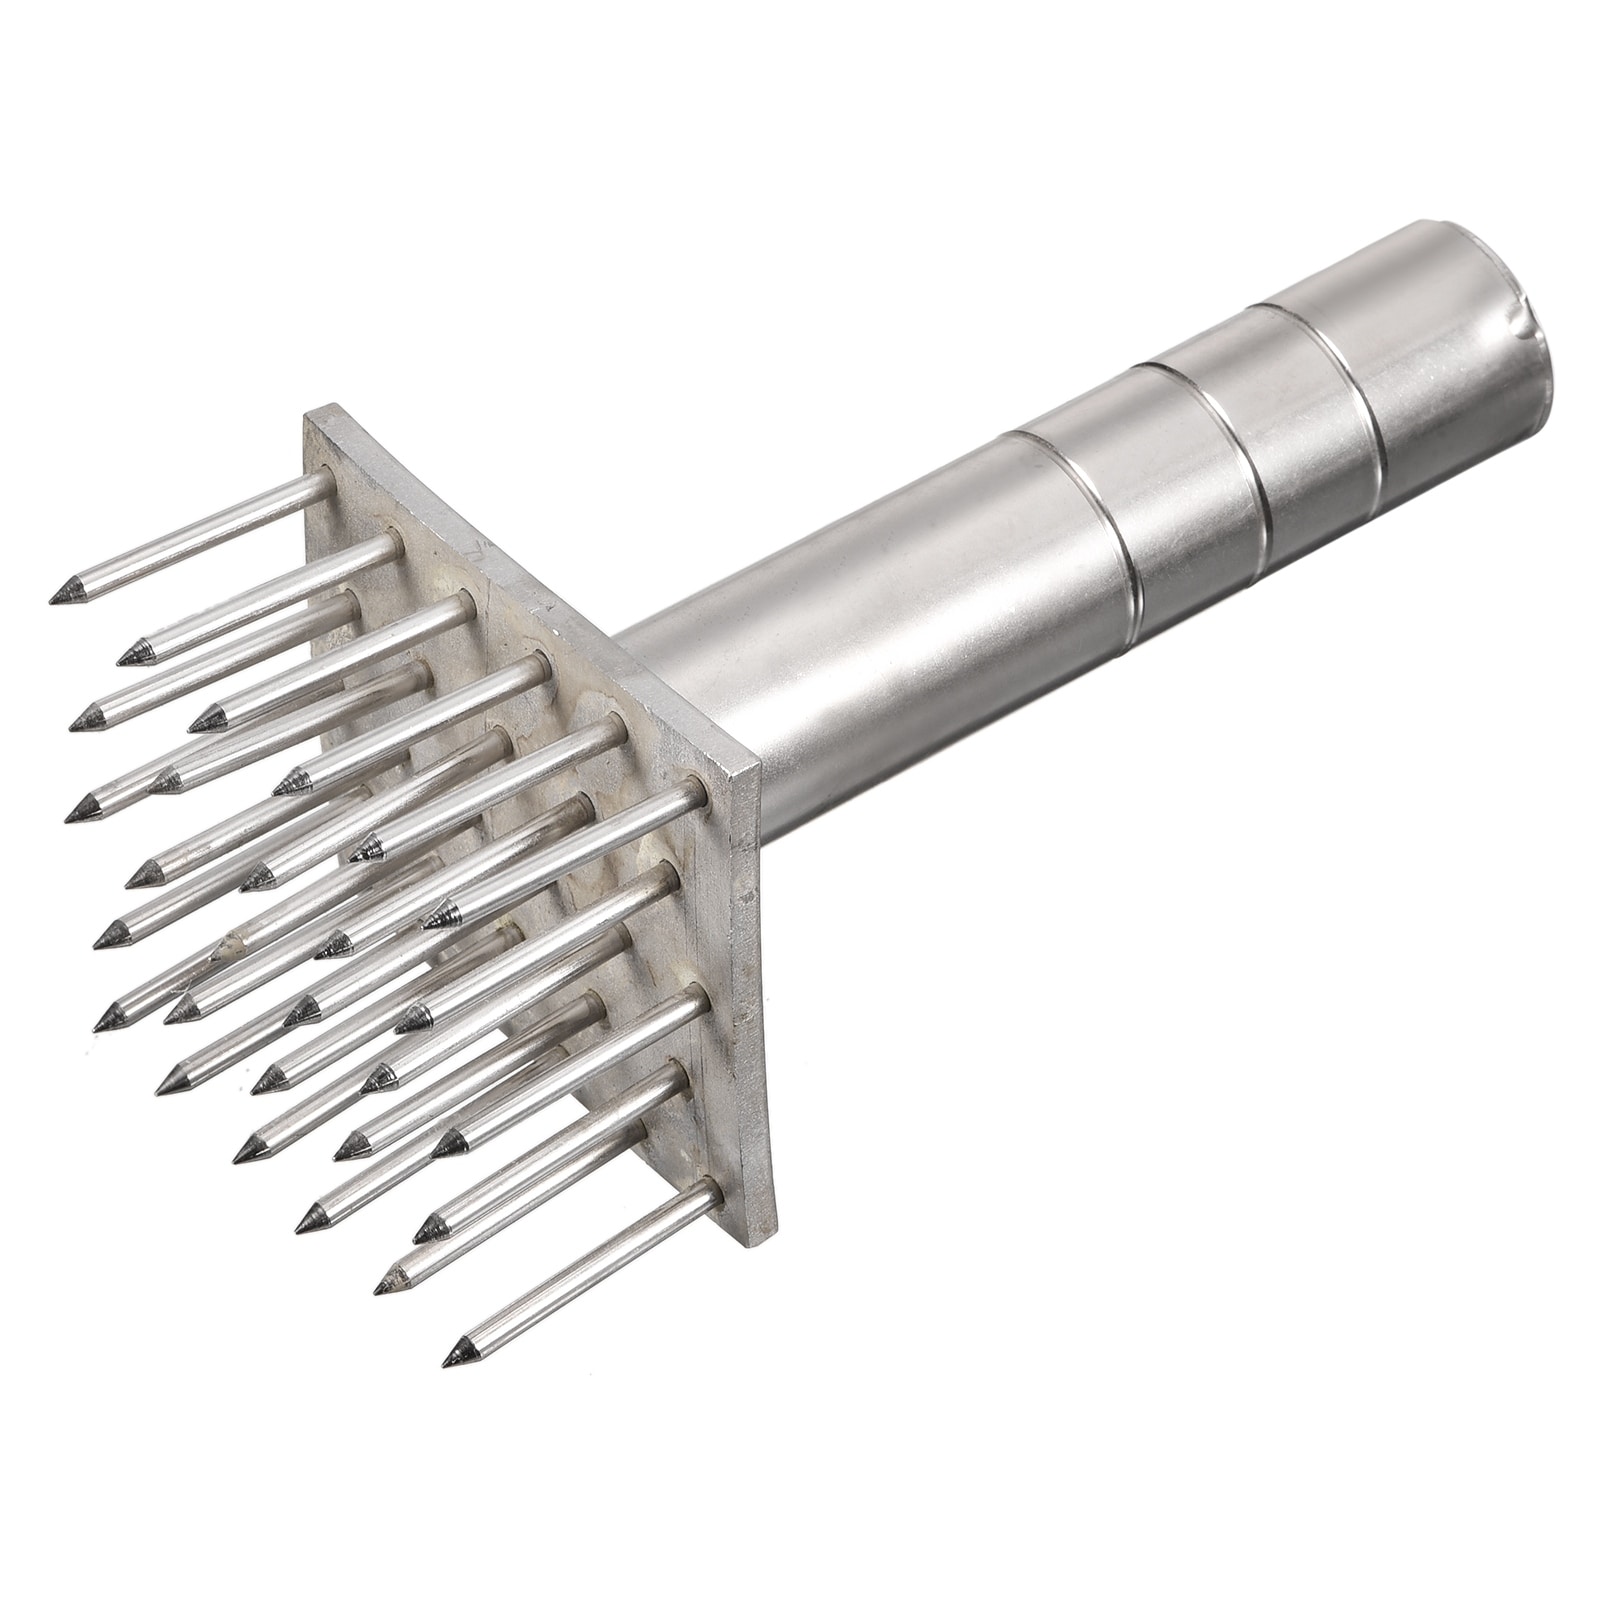 https://ak1.ostkcdn.com/images/products/is/images/direct/ec506fd57ae0bb3df1bc30bc715896661cd88a8f/Stainless-Steel-Meat-Tenderizer%2C-Meat-Mallet-Needle-Nails%2C-Silver-Tone.jpg